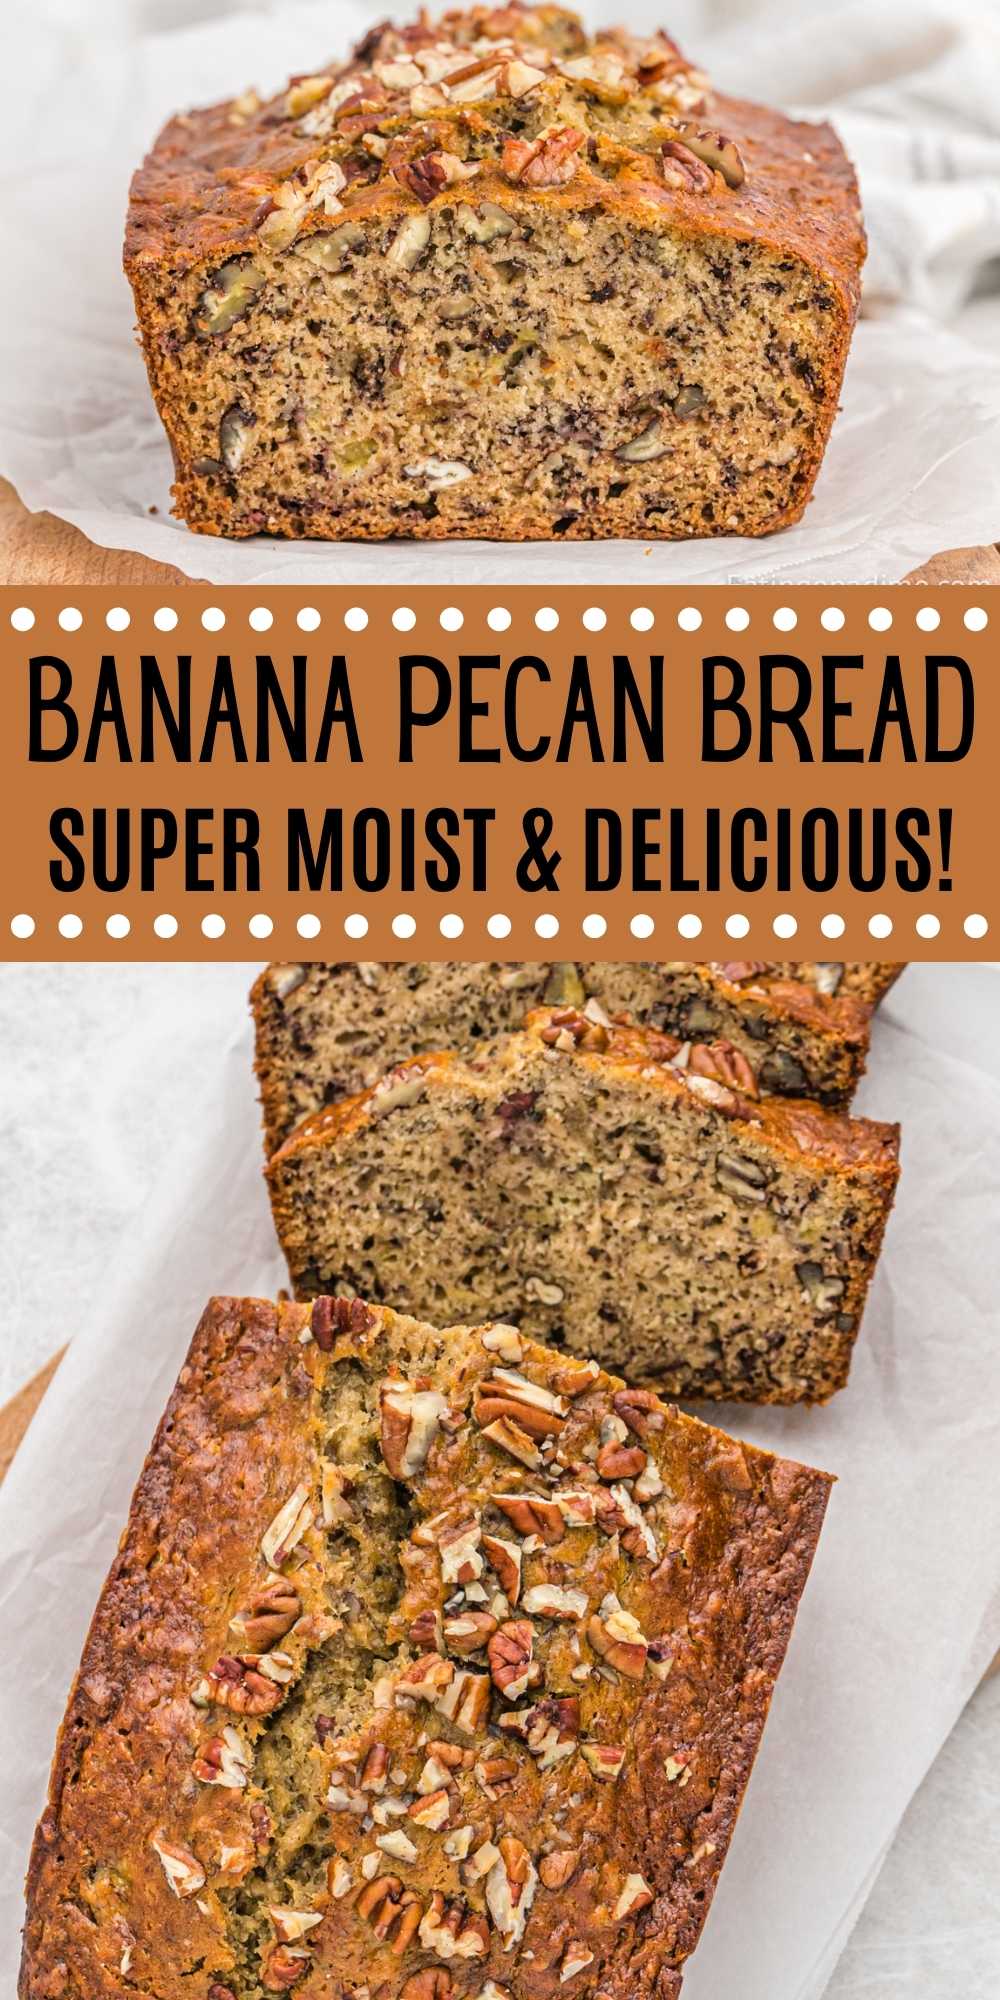 Banana Pecan Bread is a delicious and moist bread that is made with mashed bananas and pecans. Simple to make banana bread recipe that makes the perfect breakfast or snack. #eatingonadime #bananabread #bananapecanbread